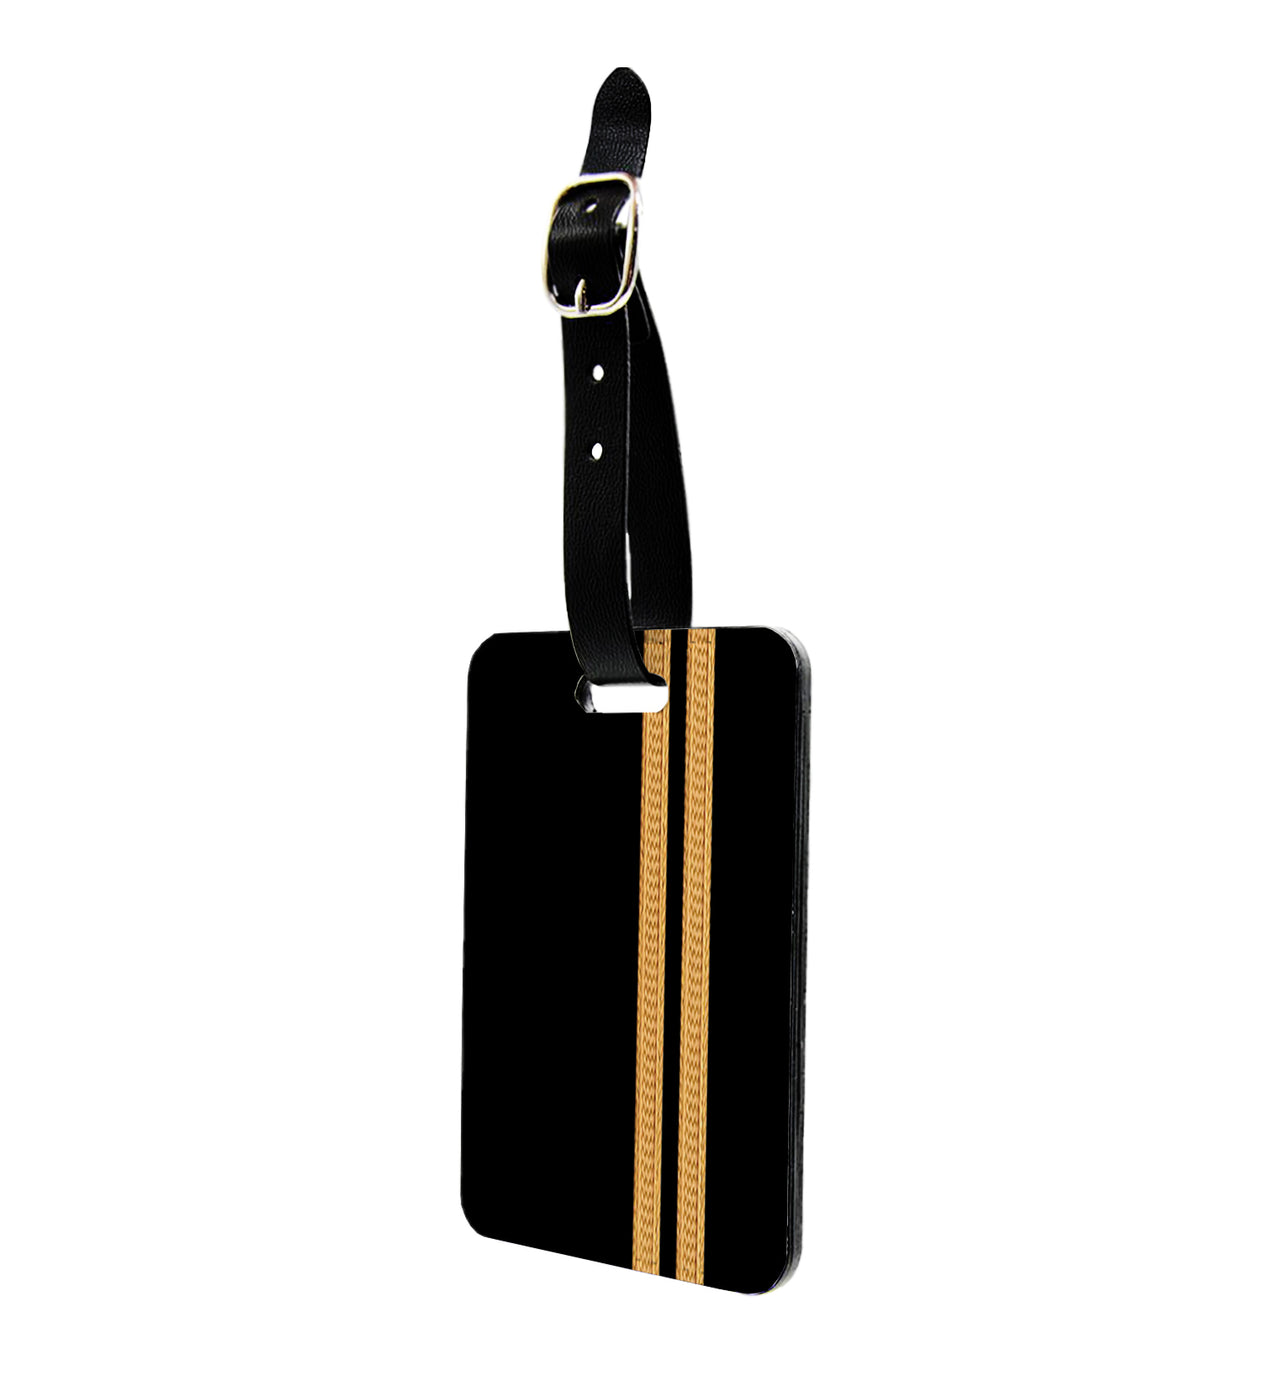 Special Golden Epaulettes (4,3,2 Lines) Designed Luggage Tag